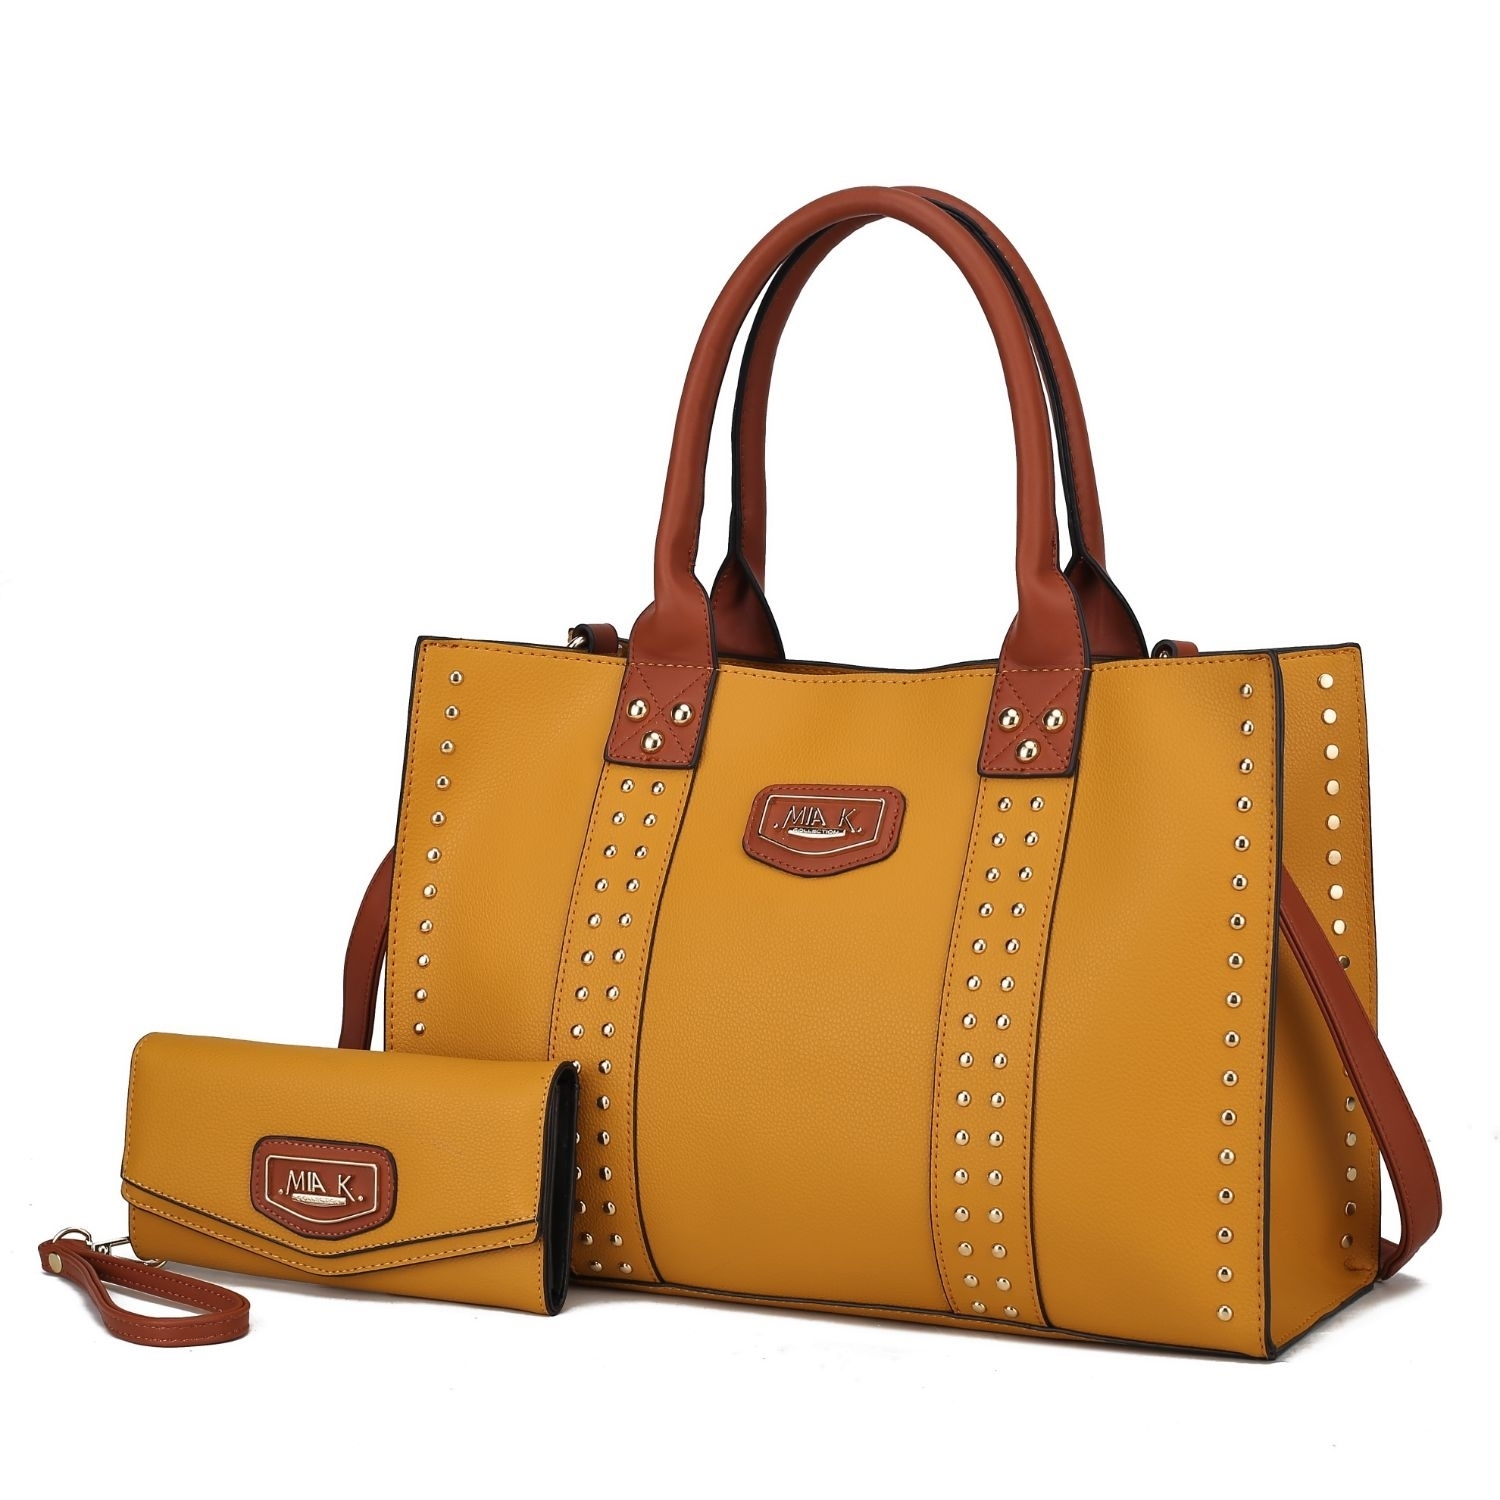 MKF Collection Davina Vegan Leather Women's Tote Bag By Mia K With Wallet -2 Pieces - Mustard